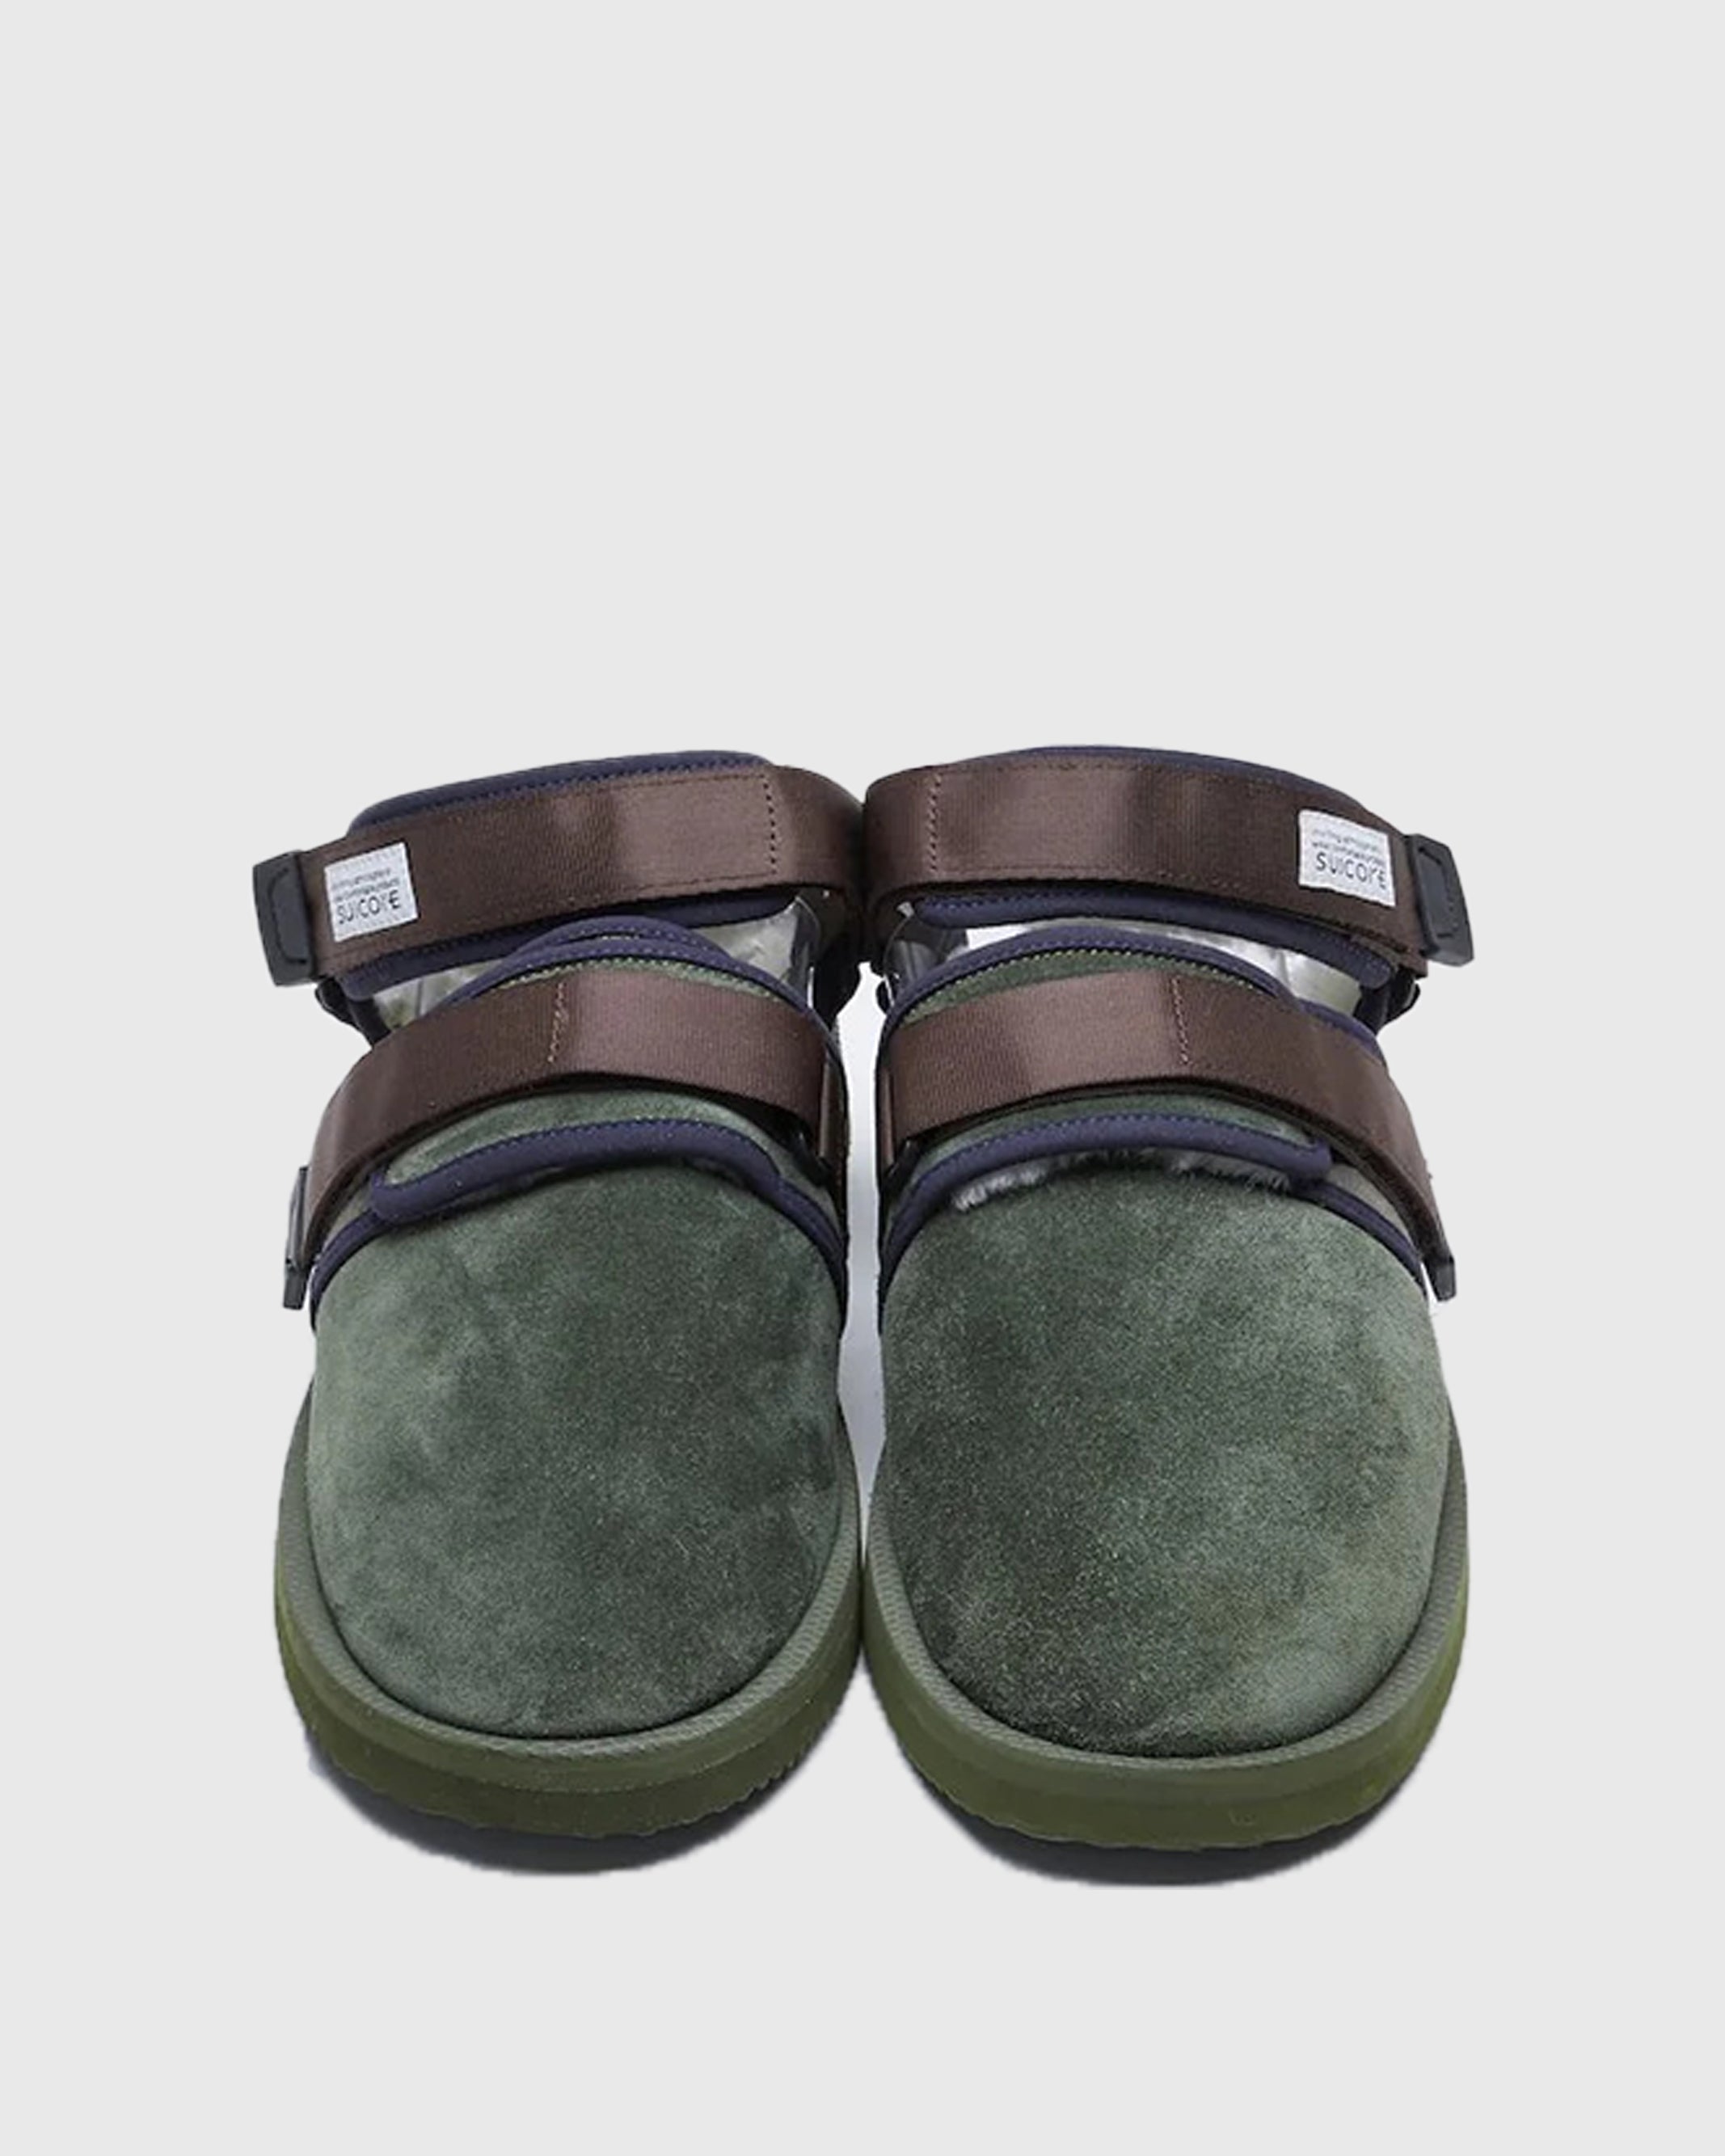 SUICOKE NOTS-Mab in Olive x Sage Green OG-061MAB | Shop from eightywingold an official brand partner for SUICOKE Canada and US.